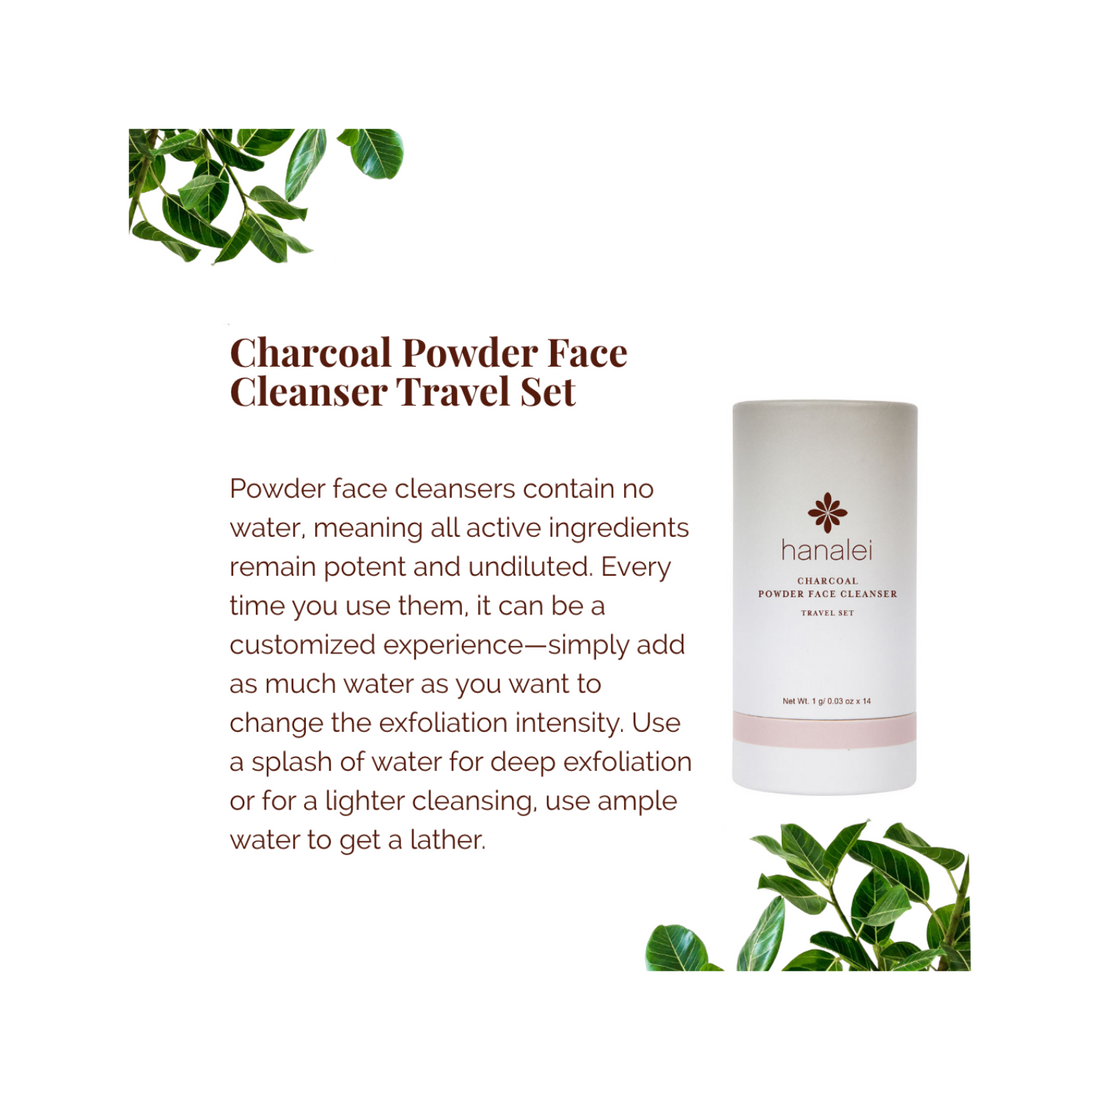 charcoal powder face cleanser